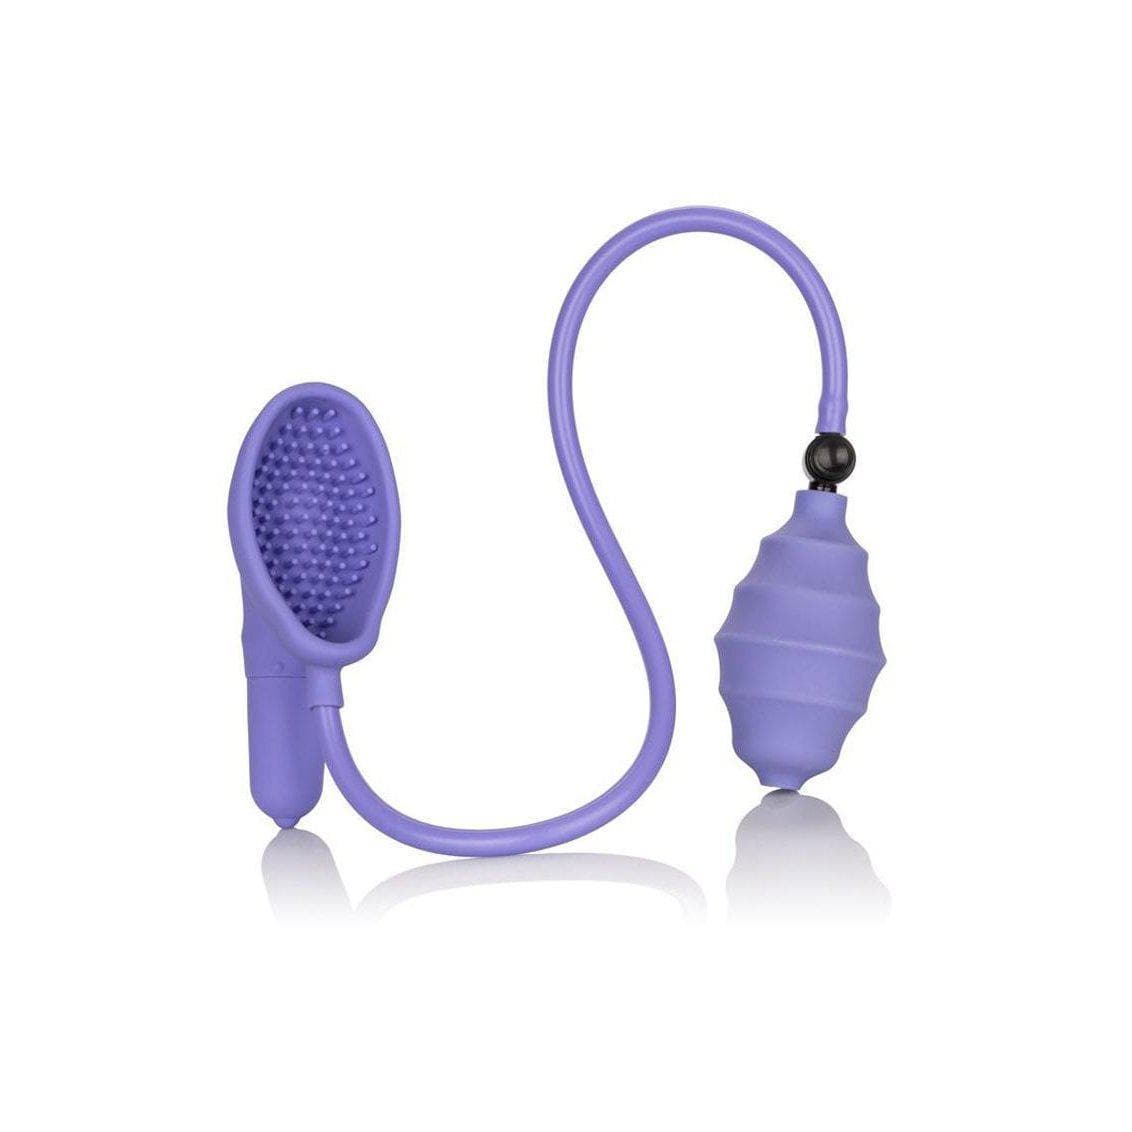 Intimate Pump Silicone Pro Intimate Vibrating Clitoris Pump with Ticklers & Suction Cup - Romantic Blessings